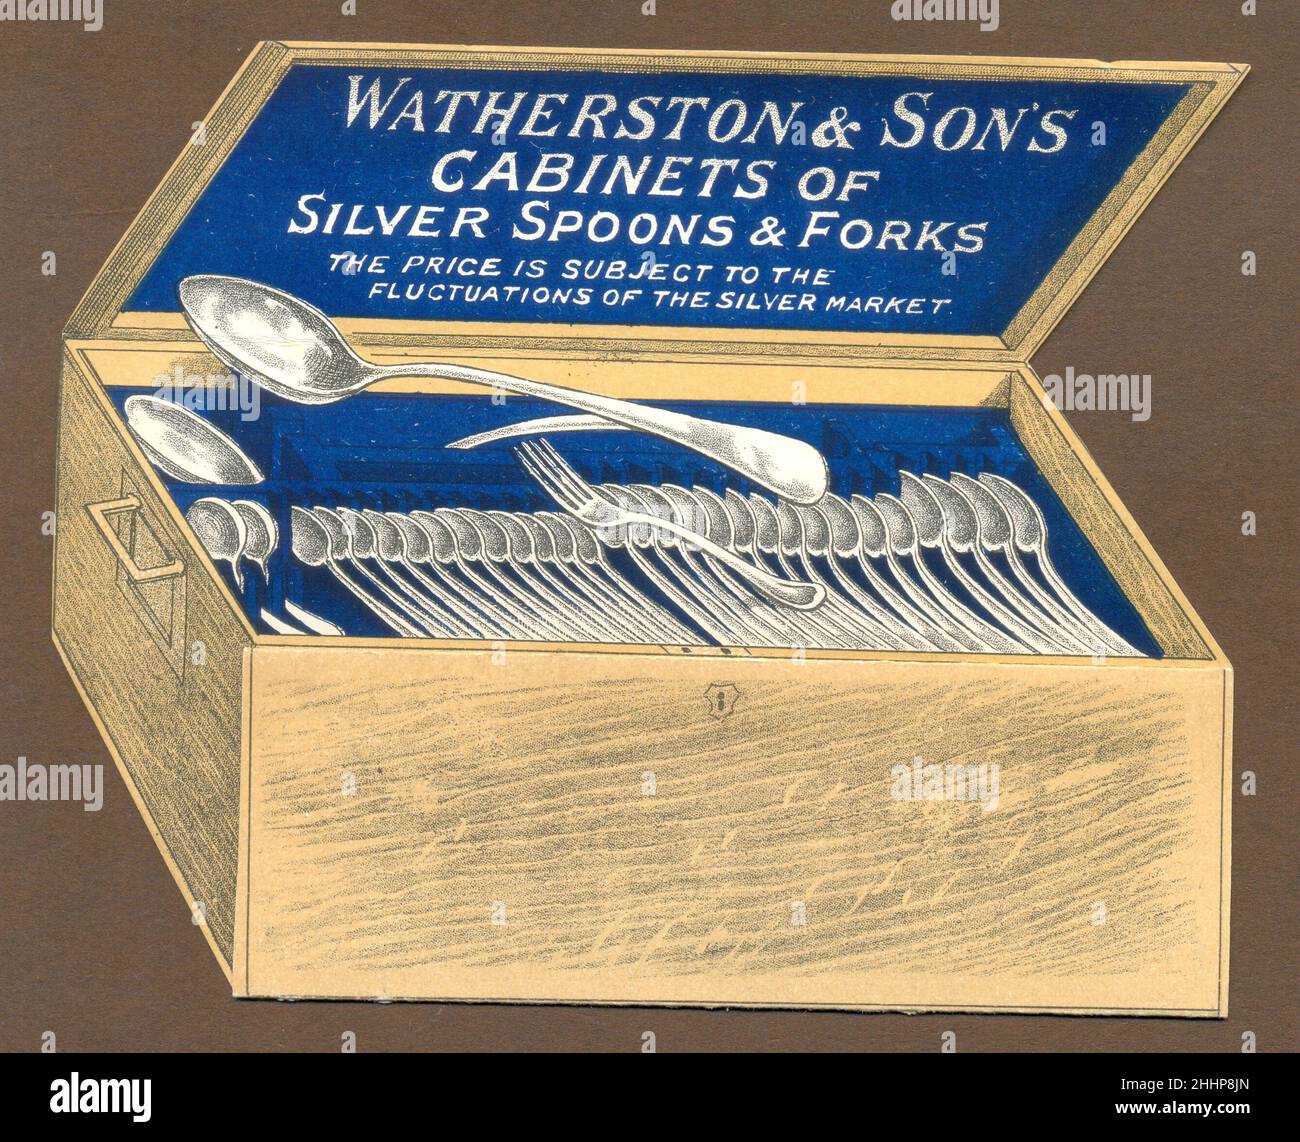 Folding die cut advertisement for Watherston & Sons Cabinets of Silver Spoons & Forks circa 1895 Stock Photo